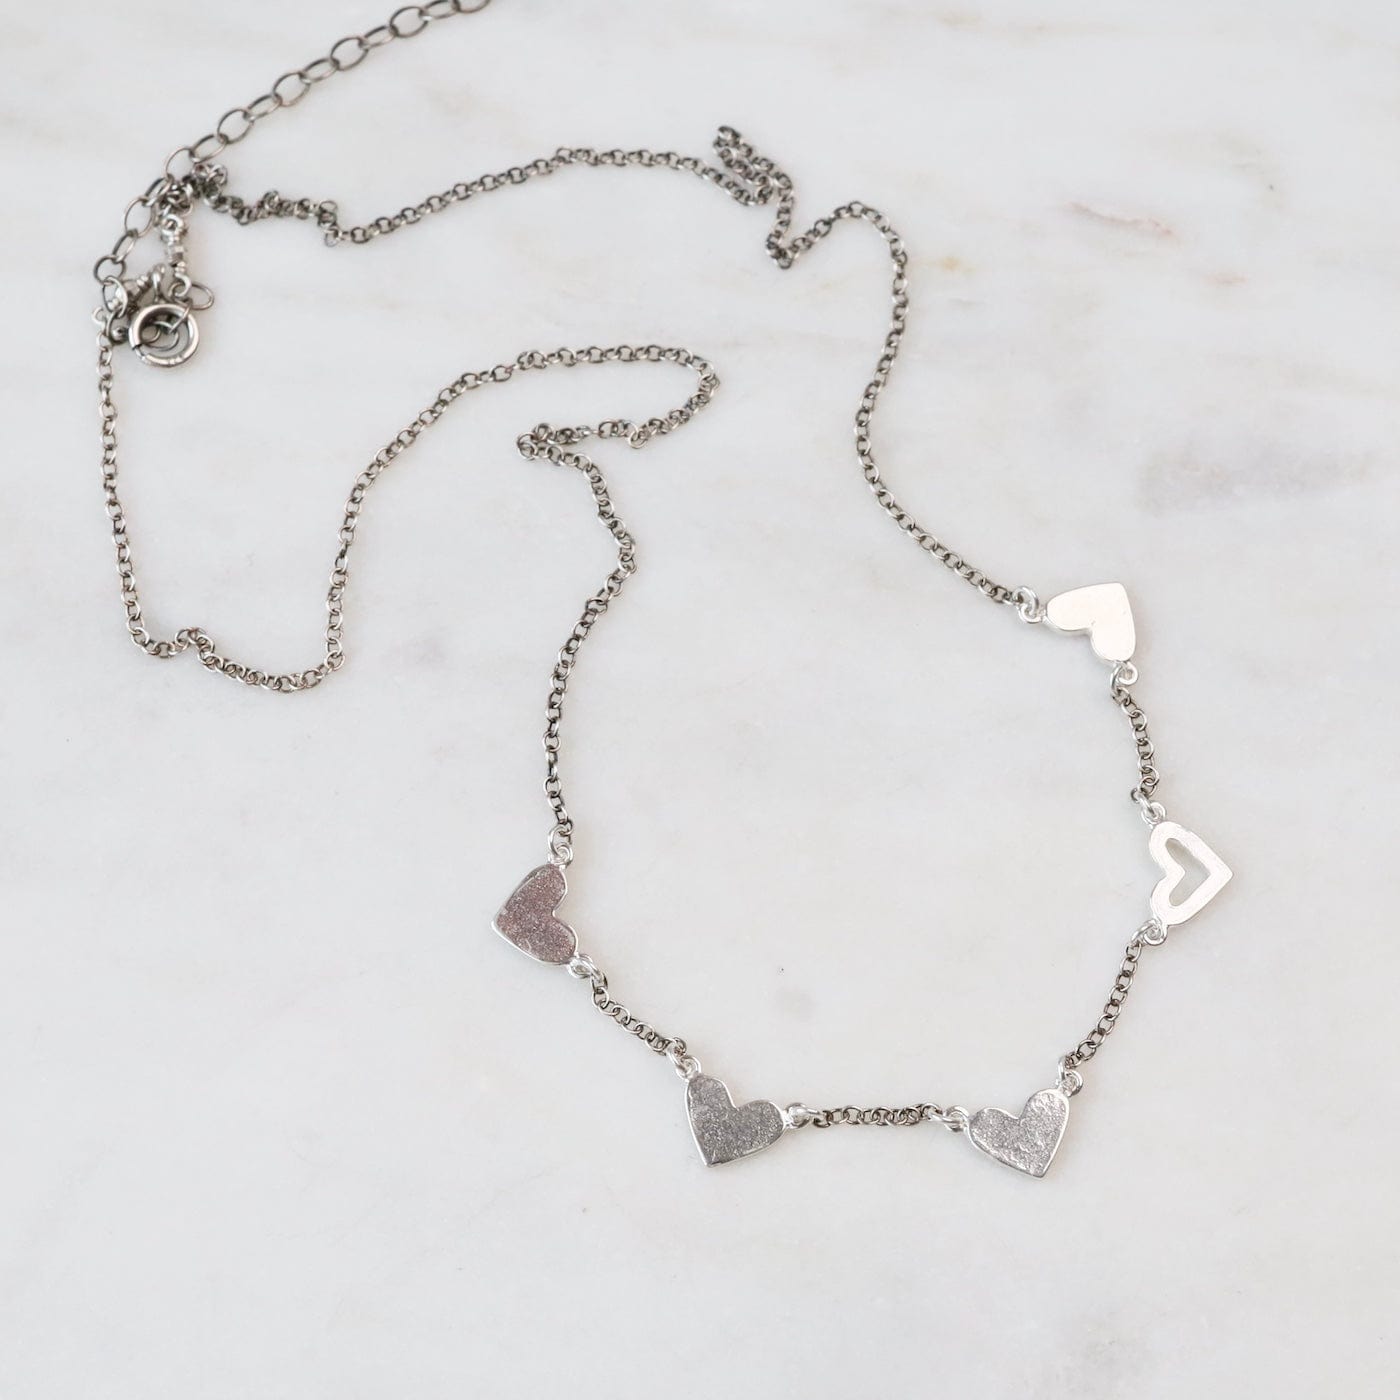 NKL String of Hearts Necklace in Sterling Silver